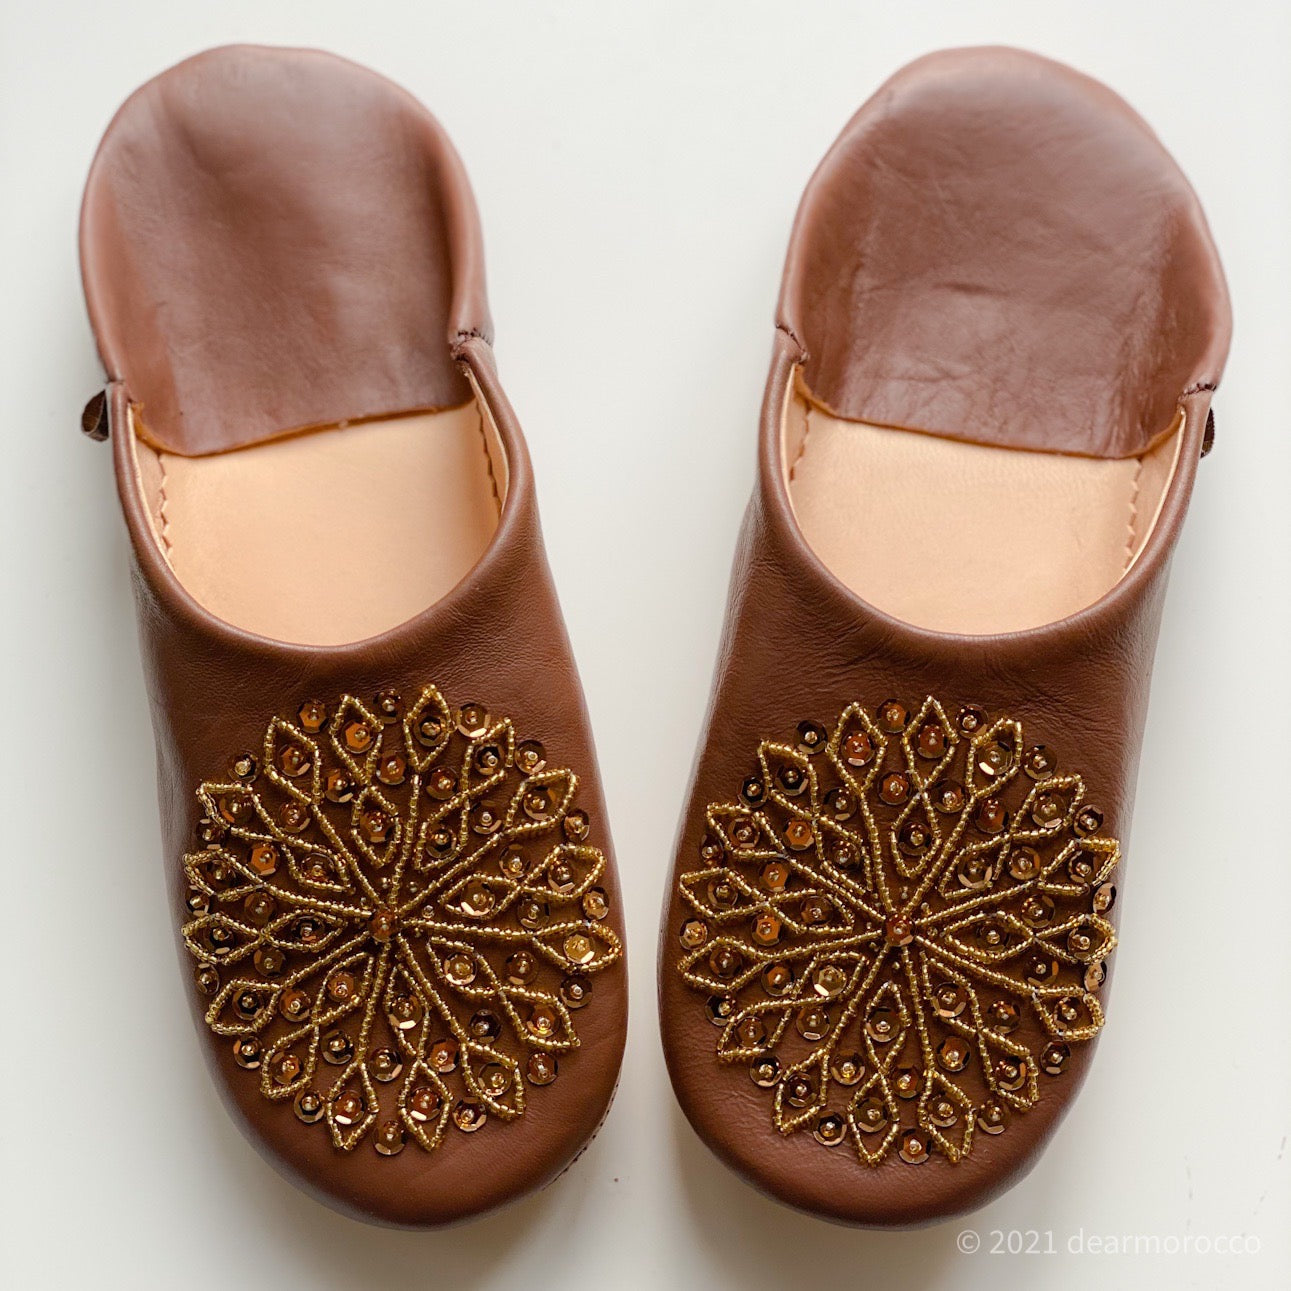 Beads Babouche Cafe// dear Morocco original leather slippers